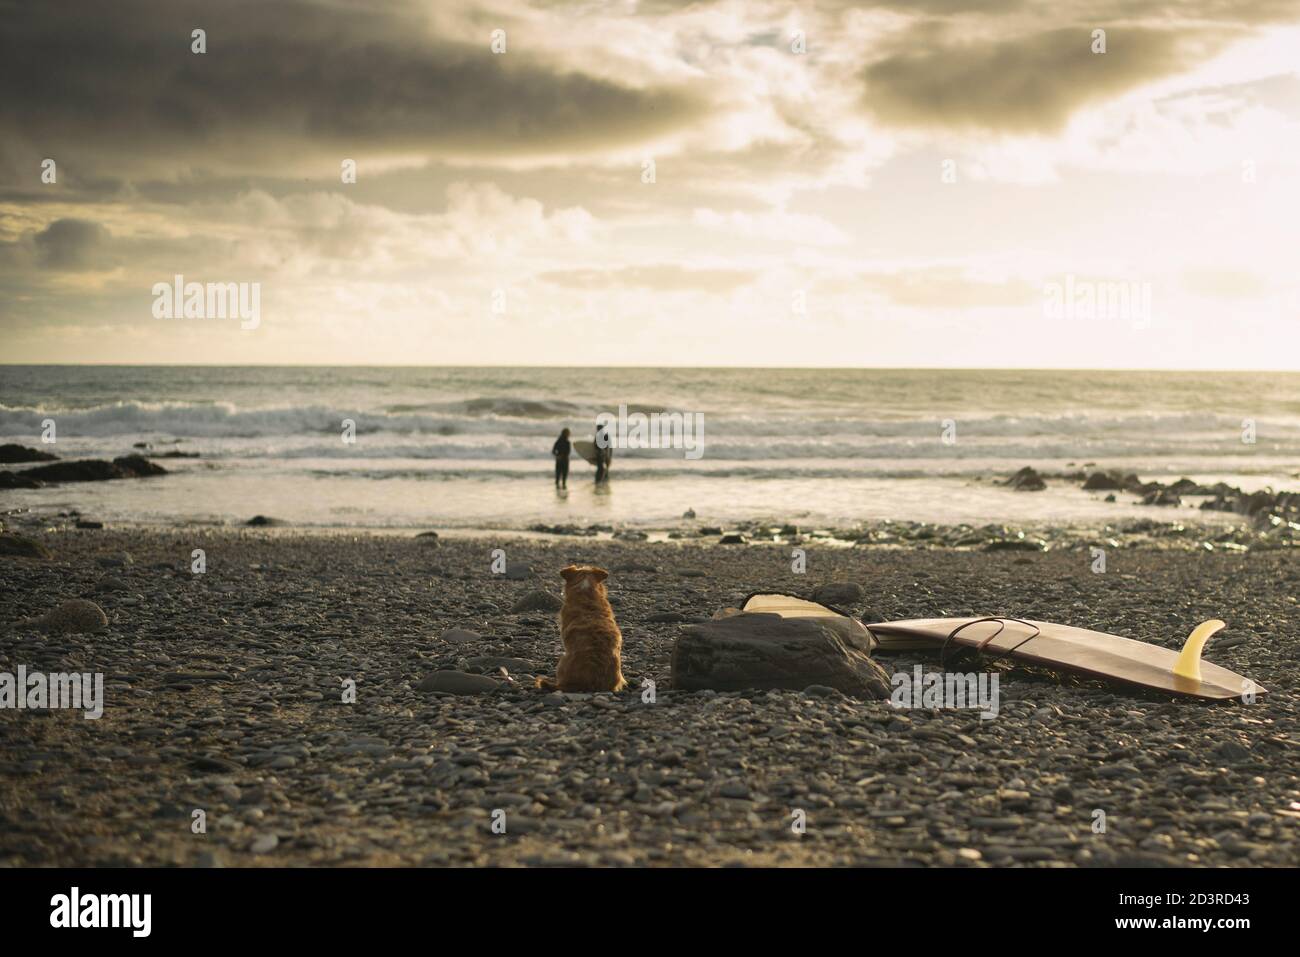 dog with surf boards watching surfers in sea Stock Photo